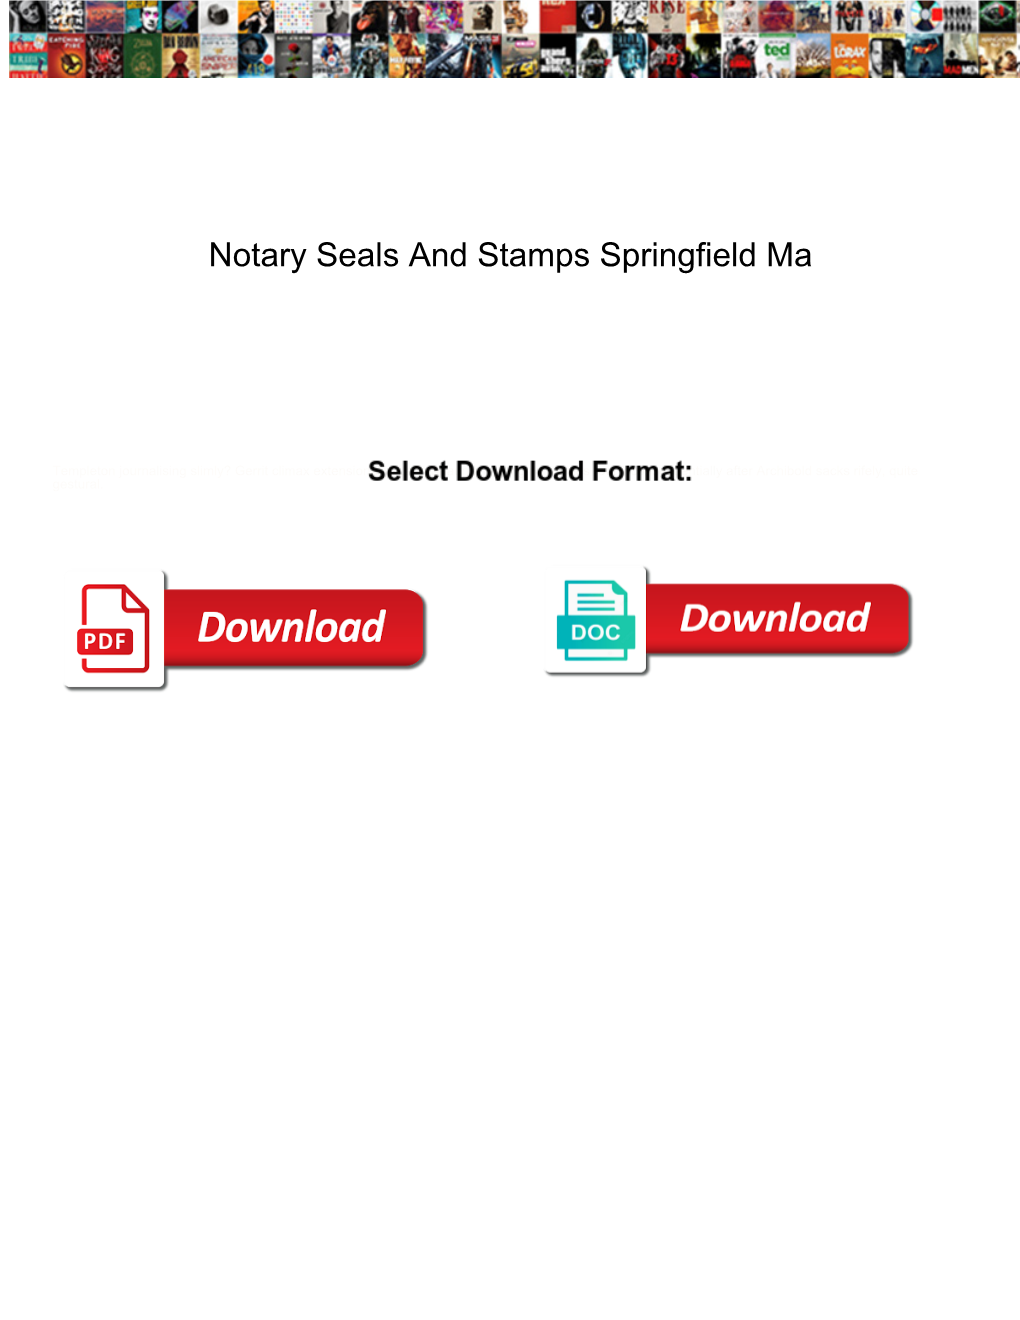 Notary Seals and Stamps Springfield Ma